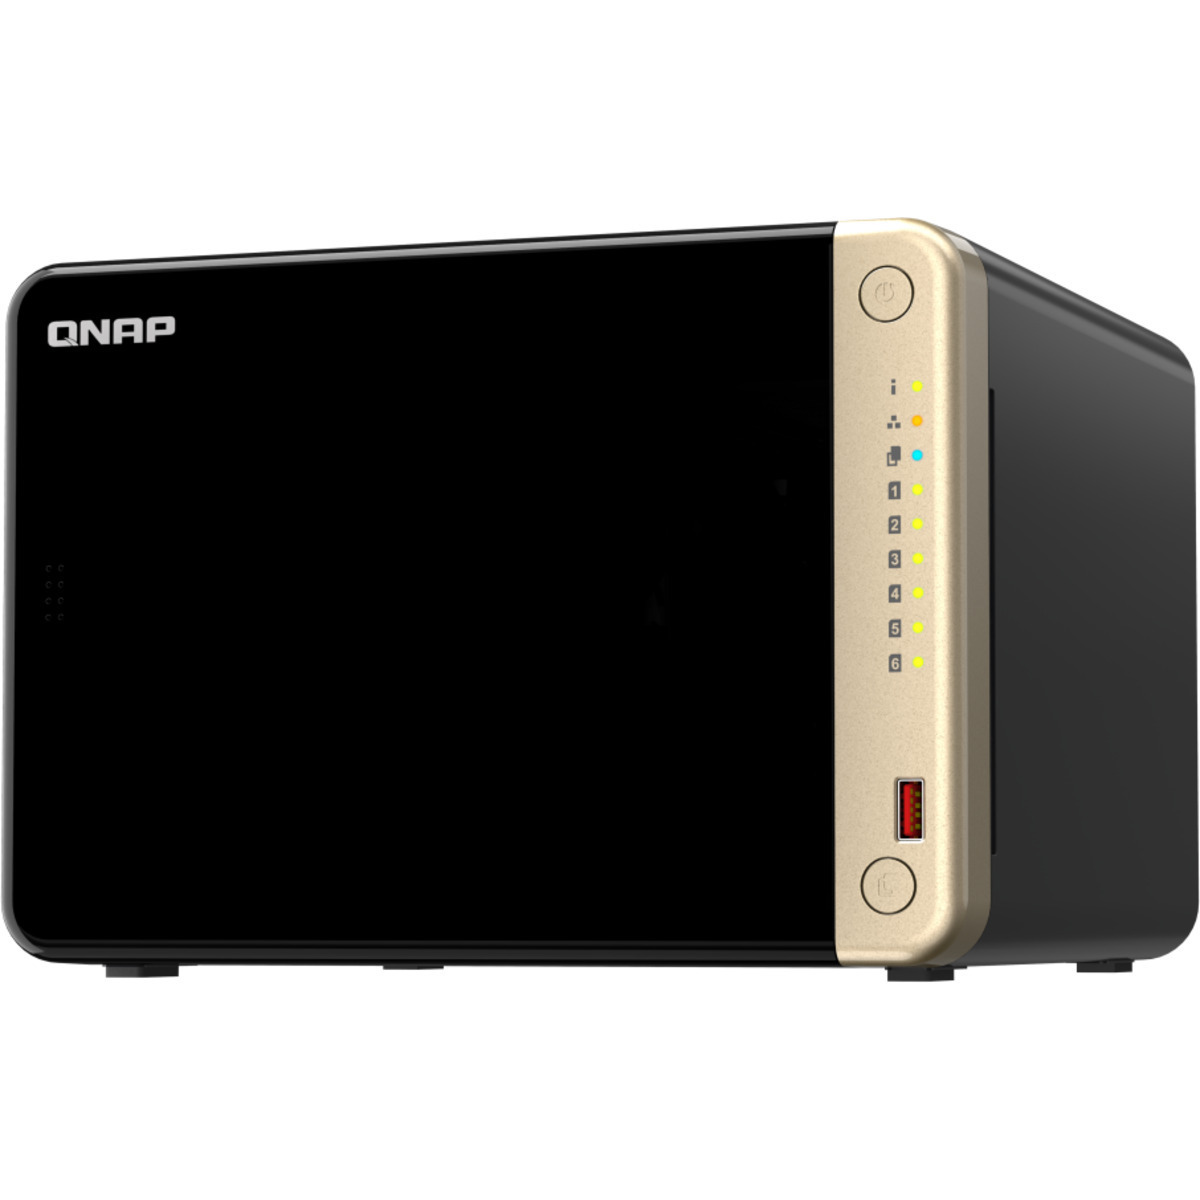 QNAP TS-664 36tb 6-Bay Desktop Multimedia / Power User / Business NAS - Network Attached Storage Device 3x12tb Toshiba Enterprise Capacity MG07ACA12TE 3.5 7200rpm SATA 6Gb/s HDD ENTERPRISE Class Drives Installed - Burn-In Tested TS-664